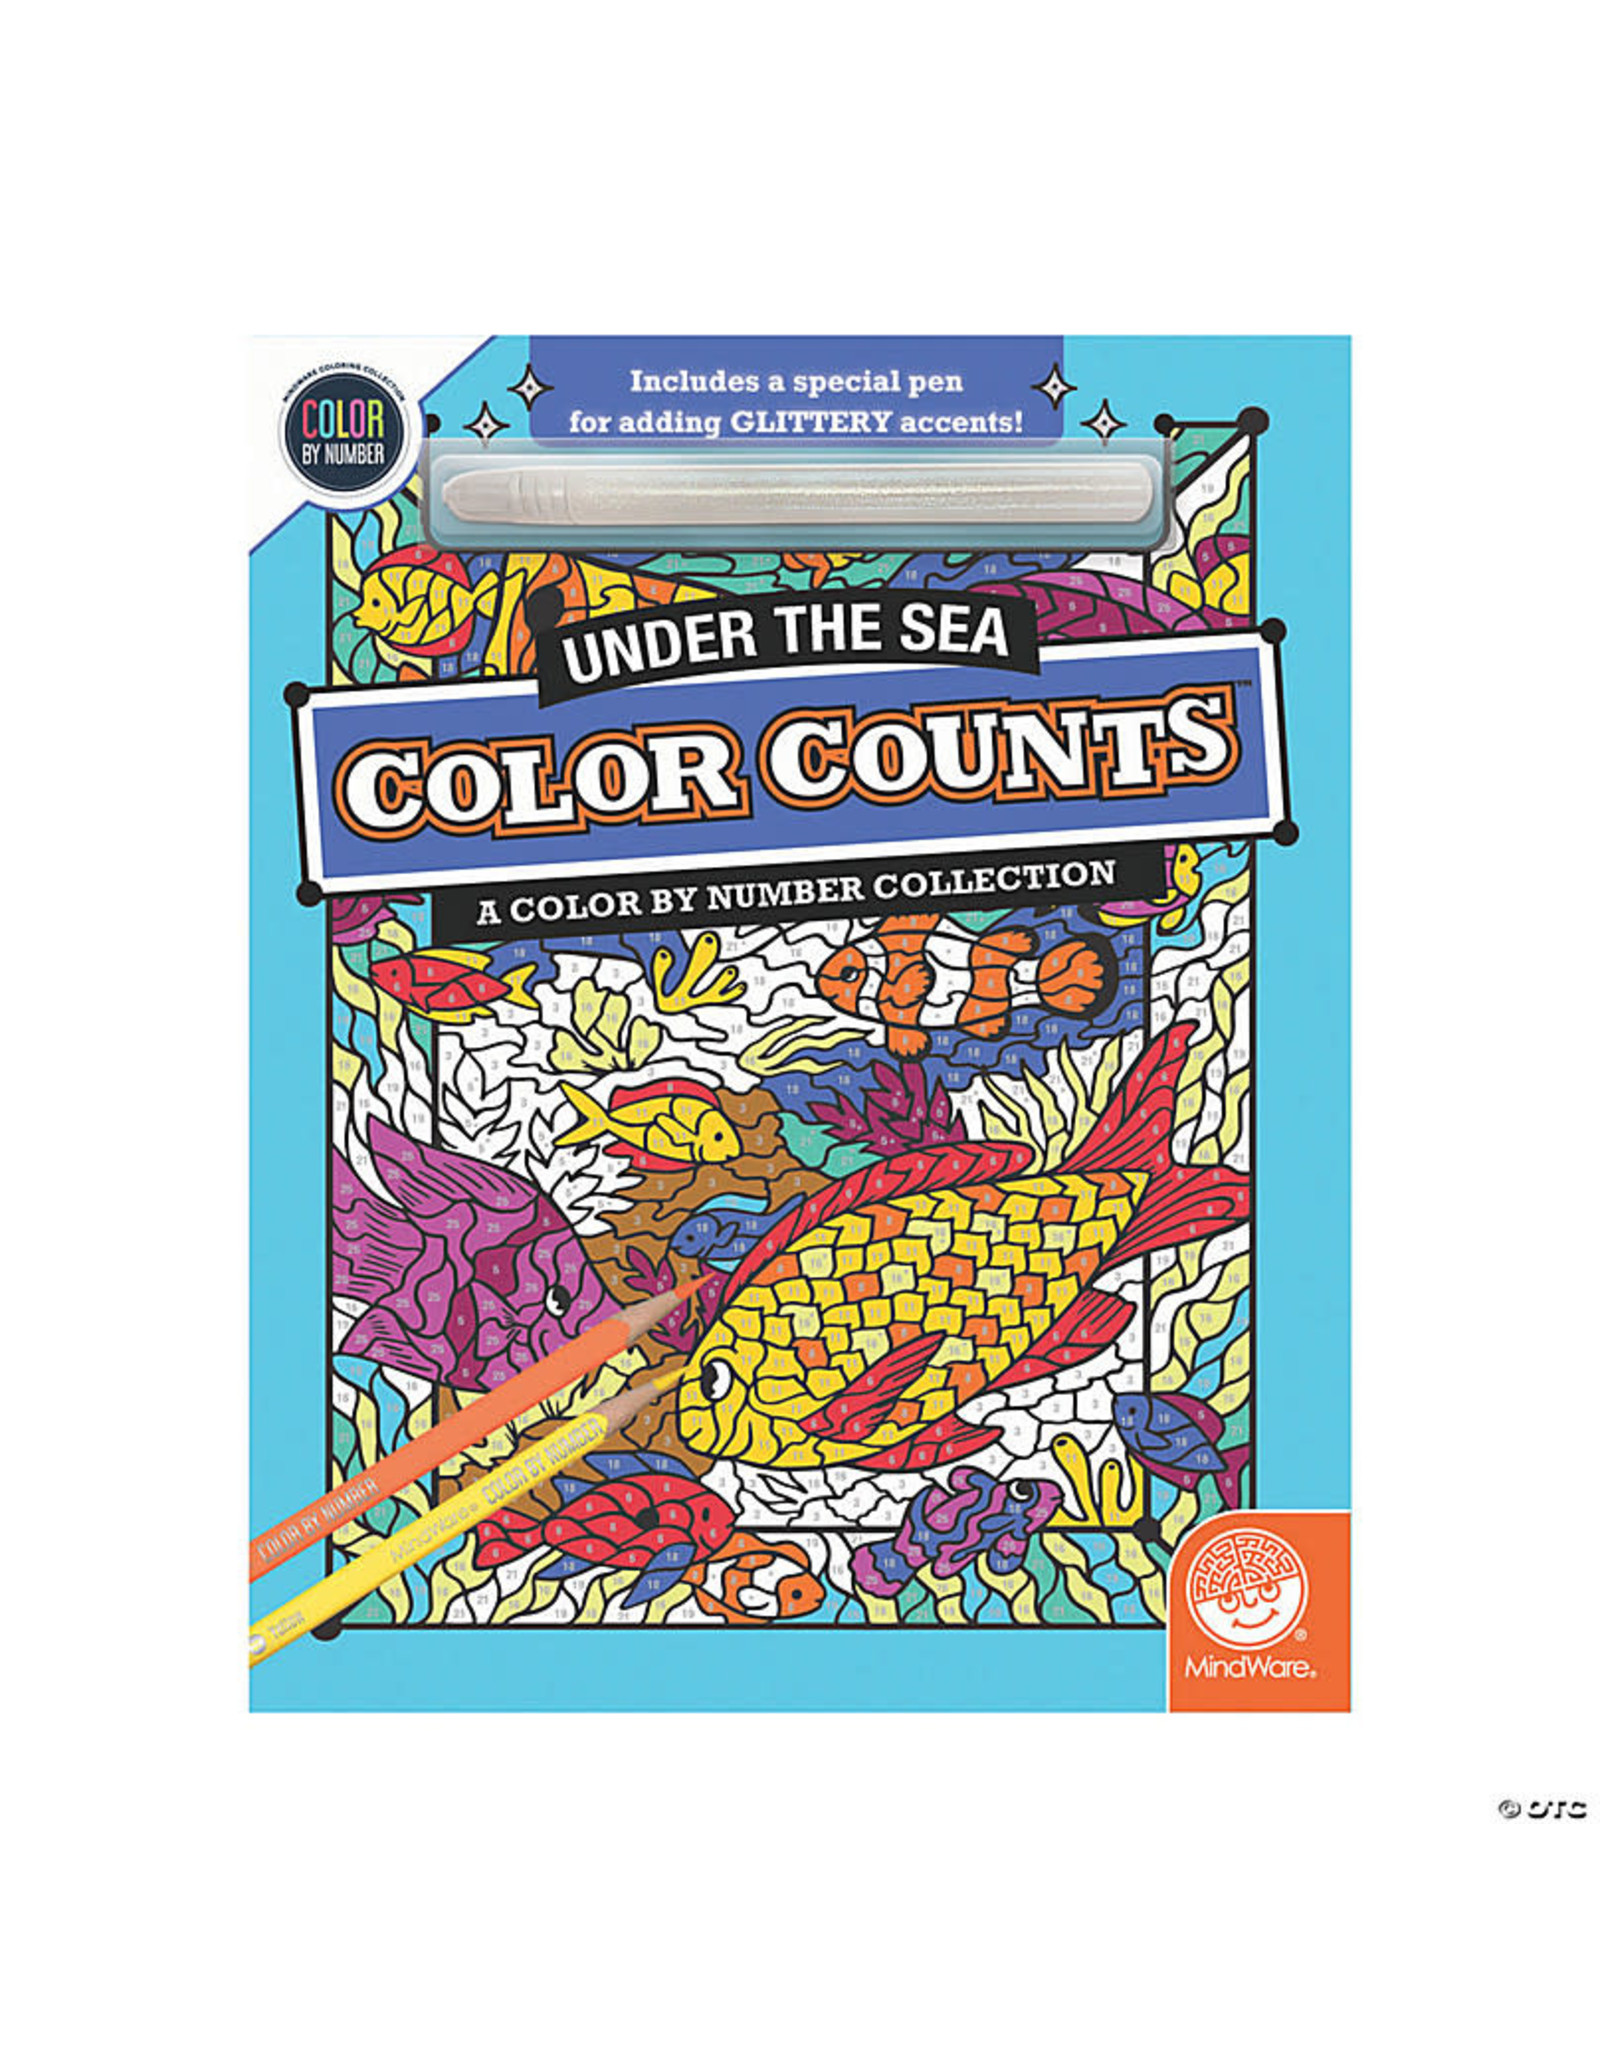 Mindware Glitter Color Counts Color By Number: Under The Sea